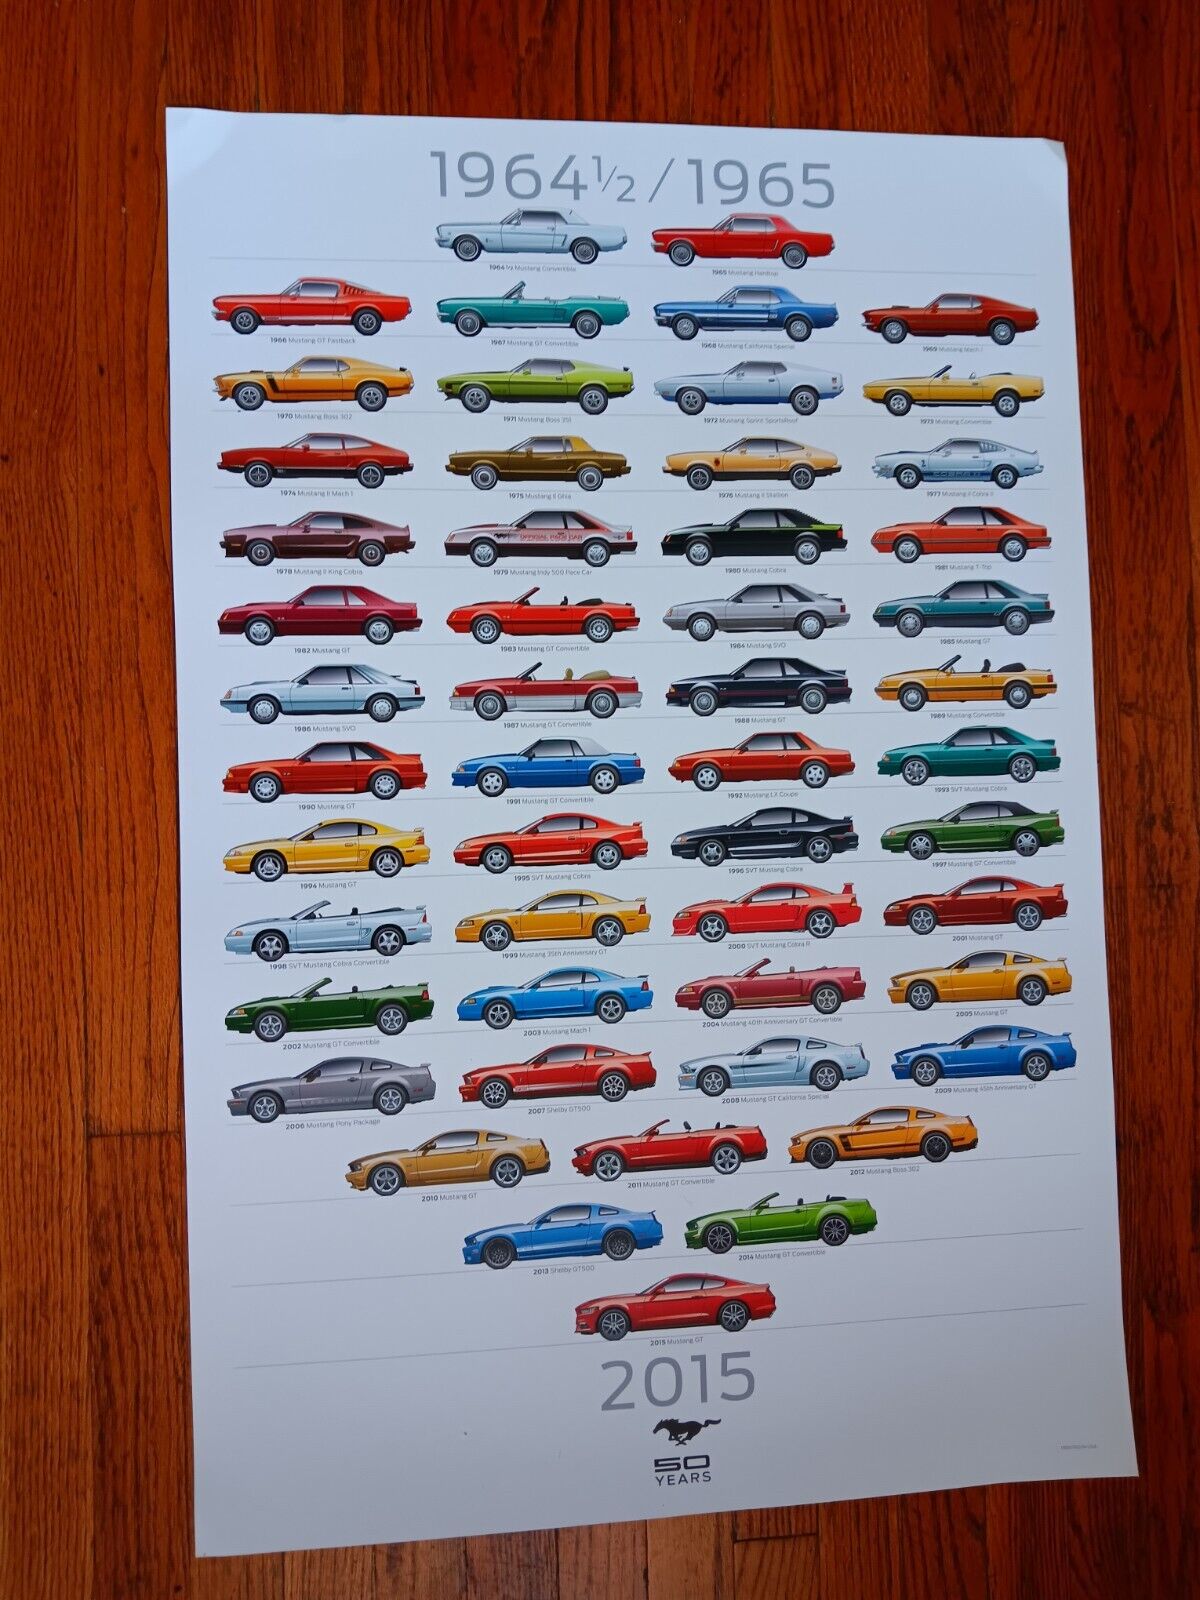 1964.5-2015 MUSTANG 50TH ANNIVERSARY POSTER 36X24